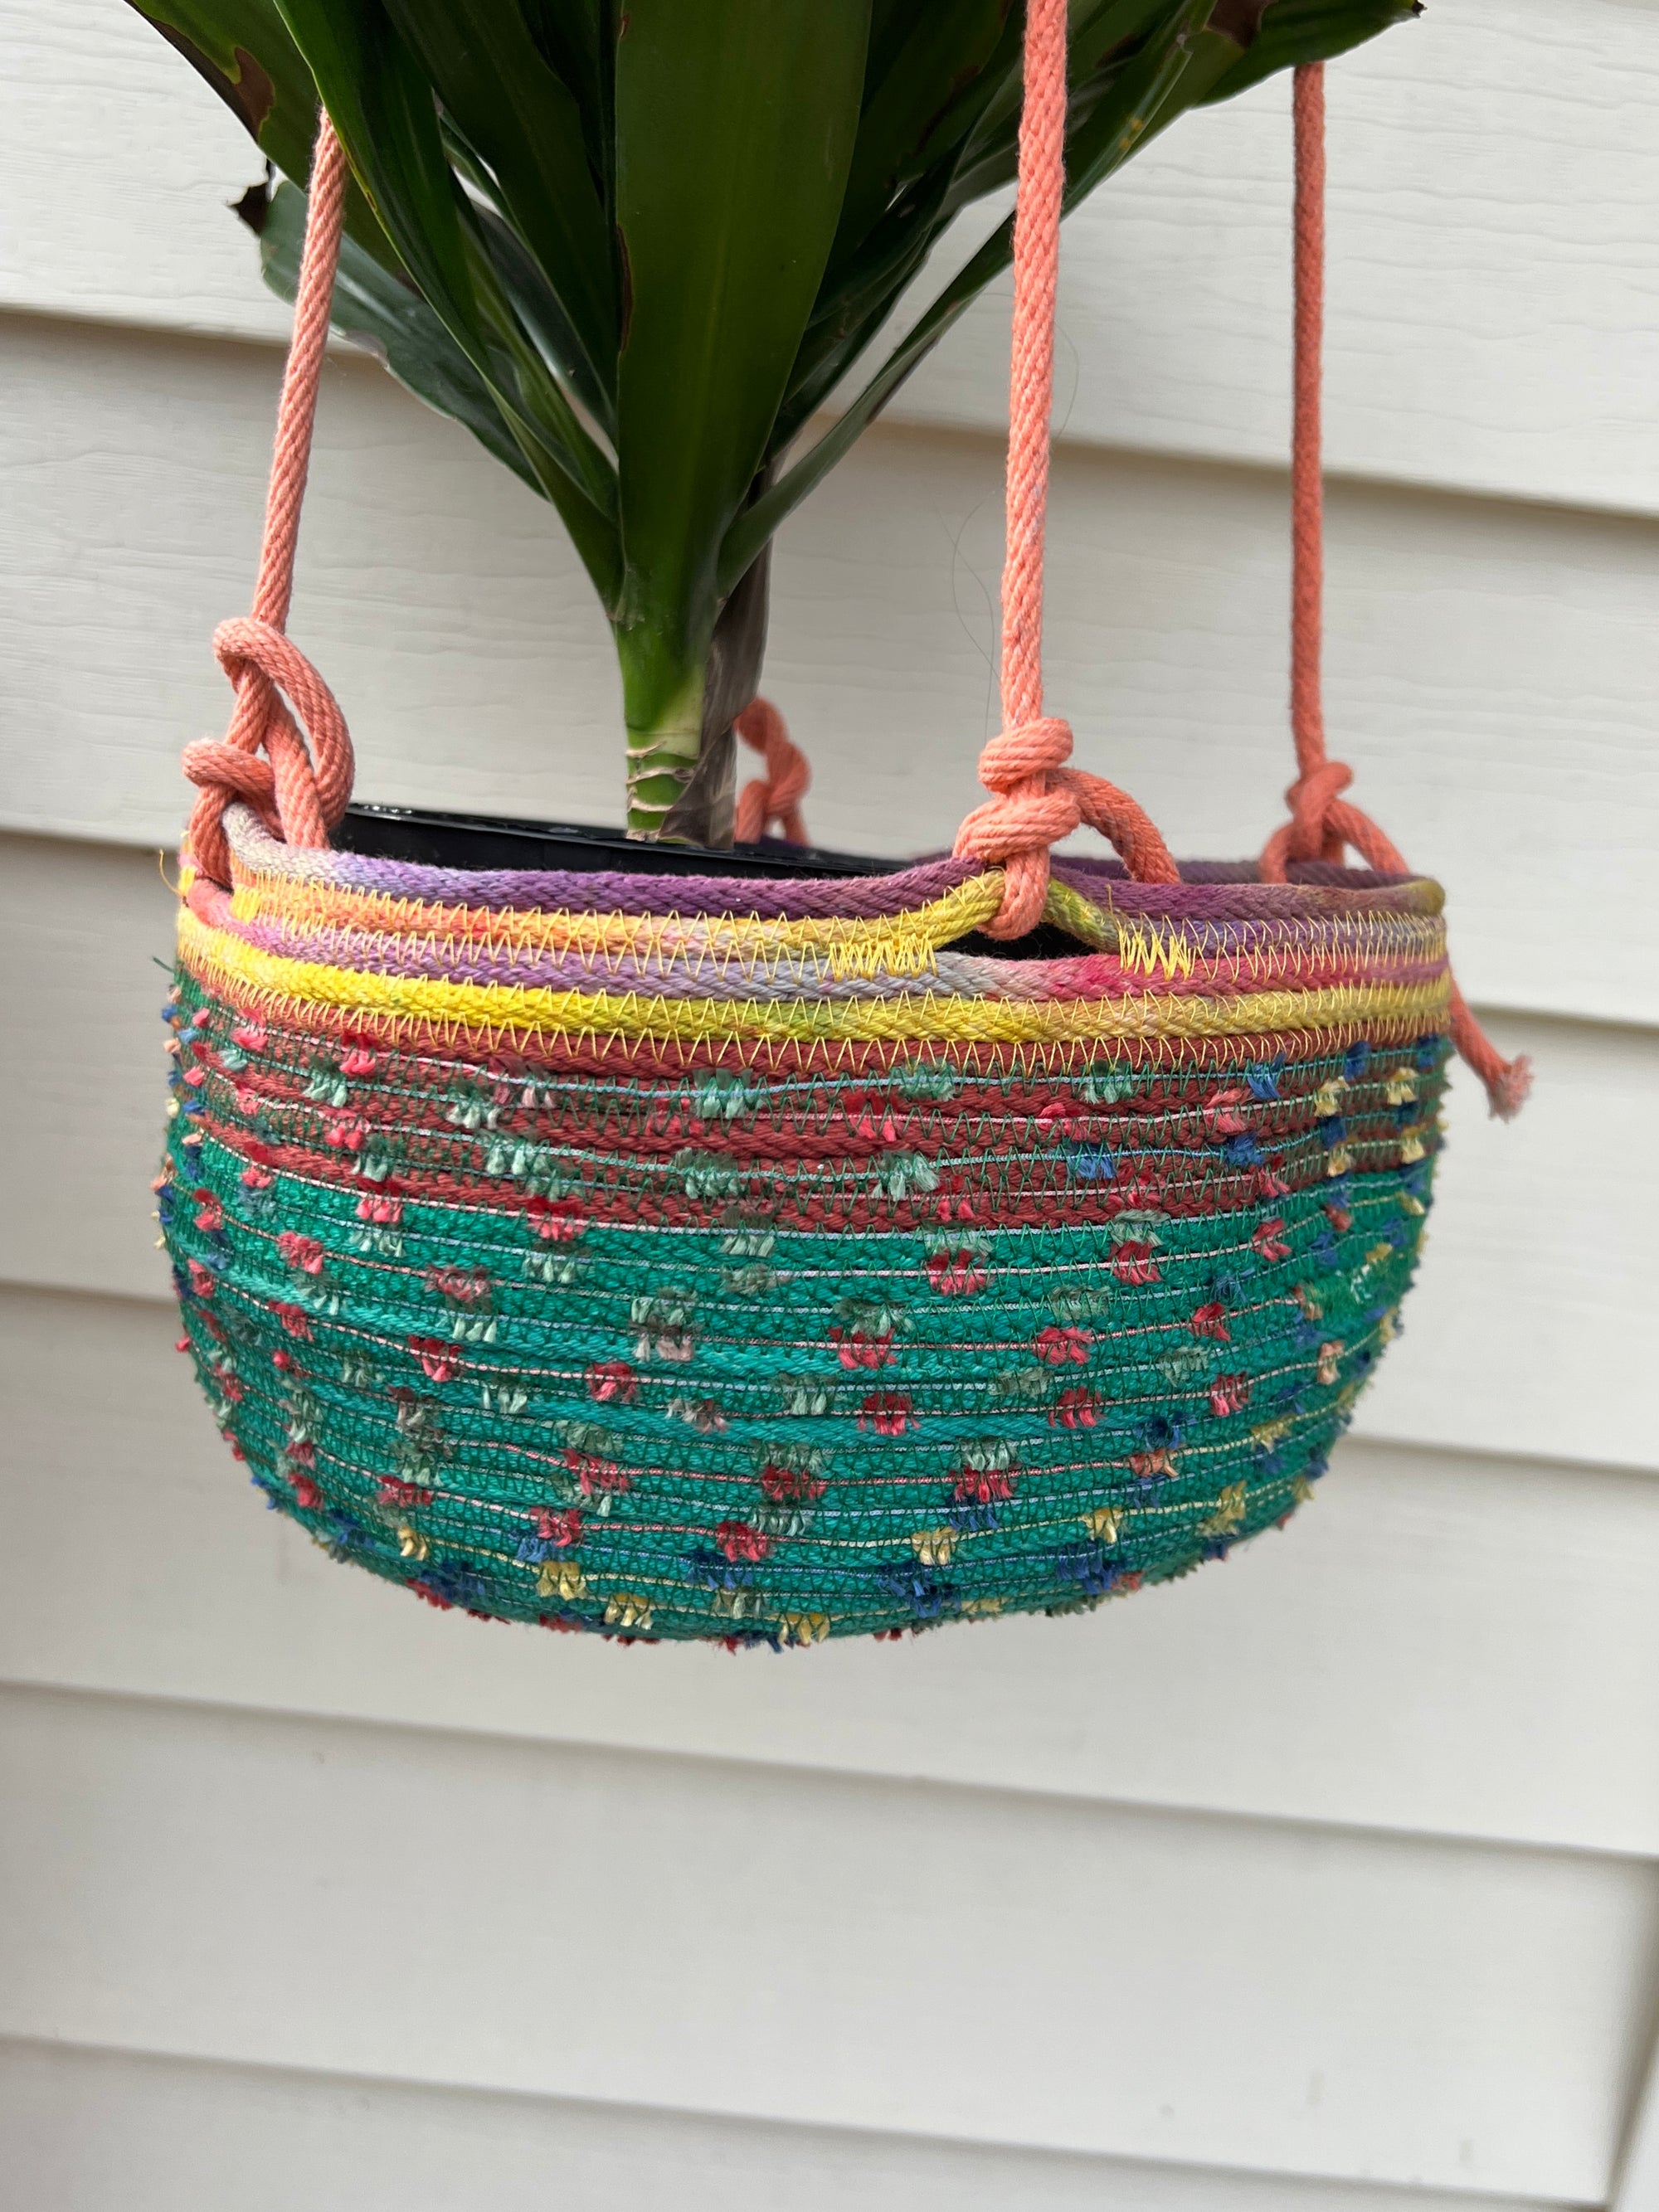 Hanging Planter Coiled Rope Green with Fuzzy Accents